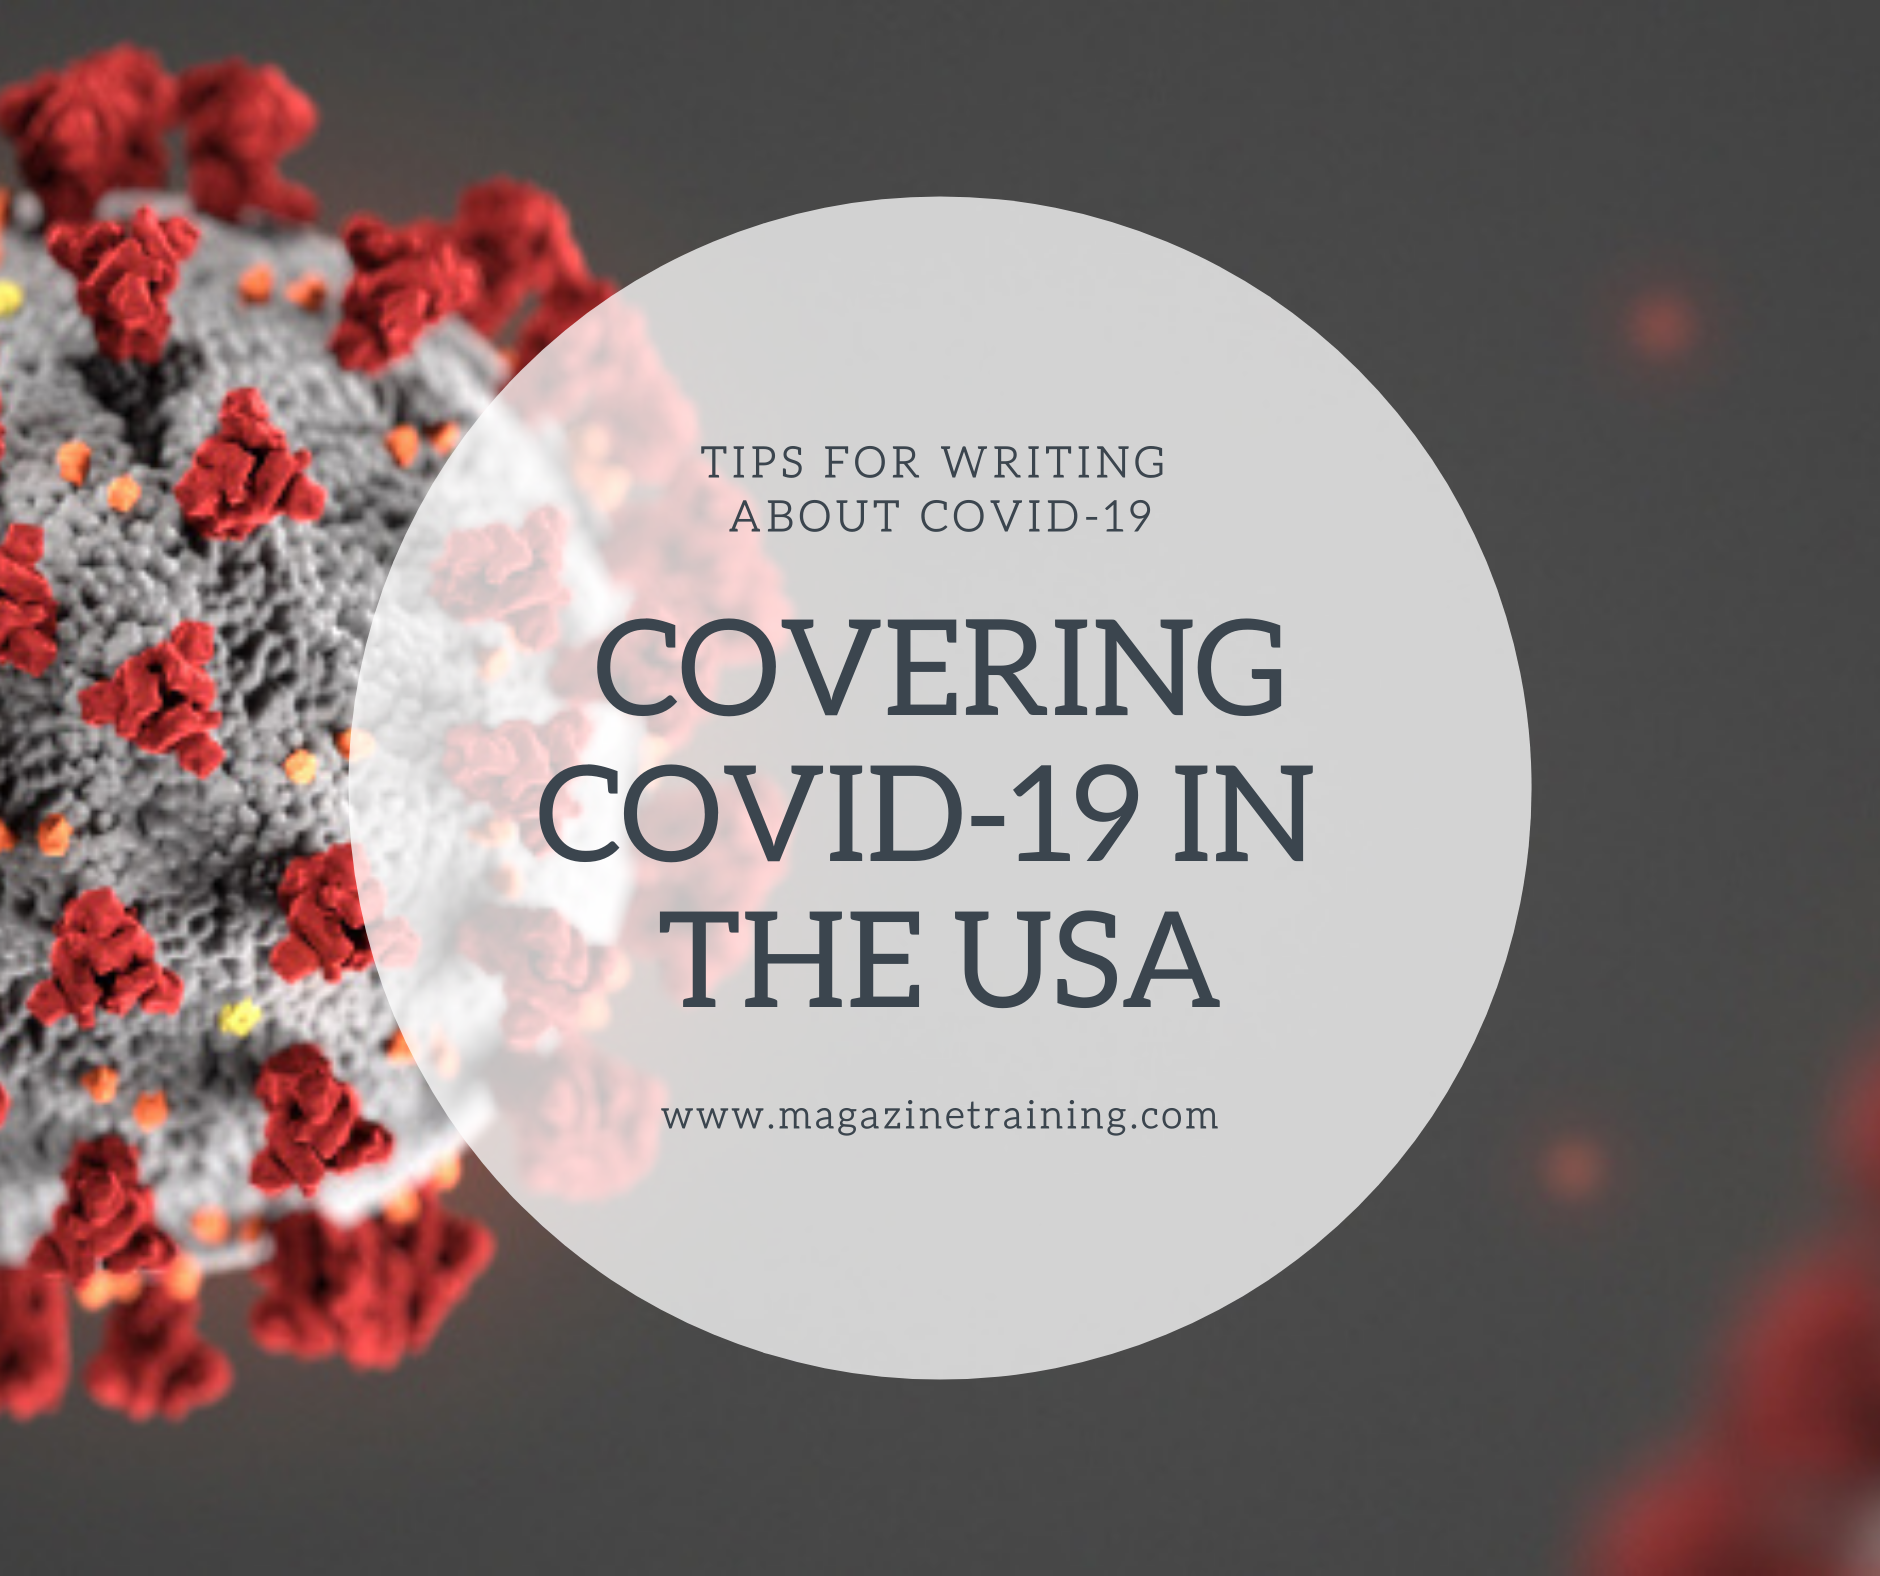 covering COVID-19 in the USA